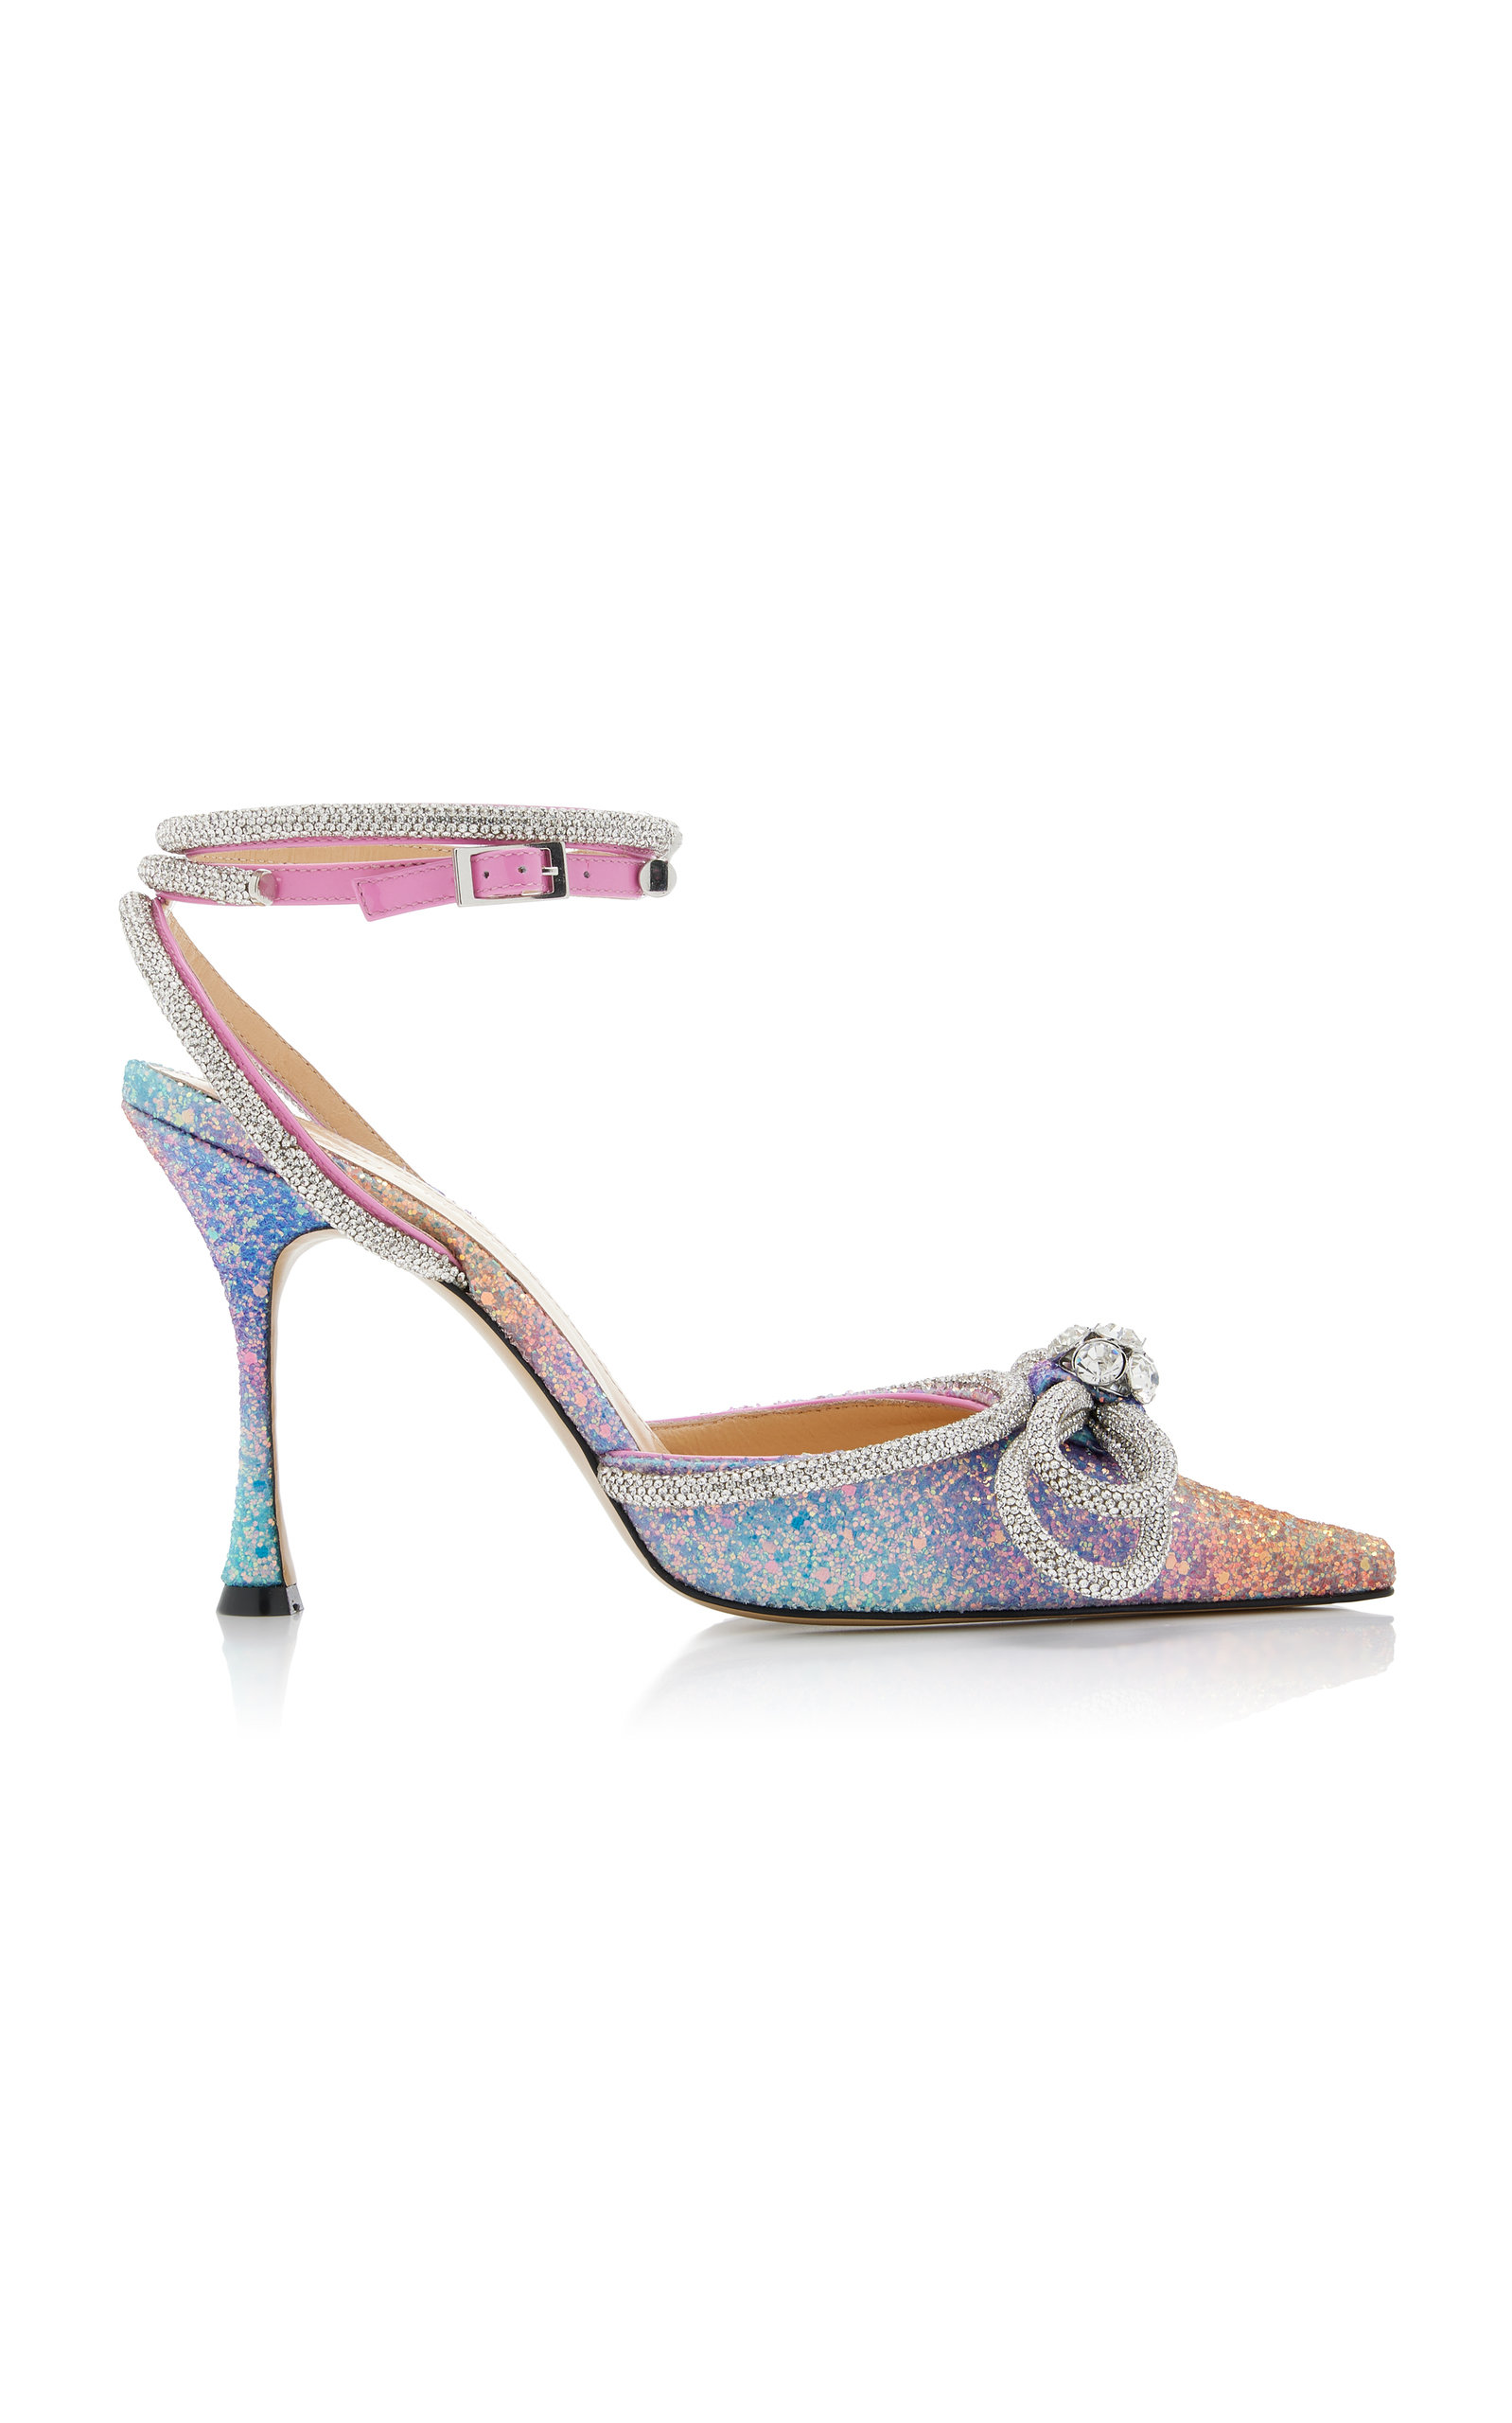 Mach & Mach Women's Exclusive Glittered Double Bow Pumps